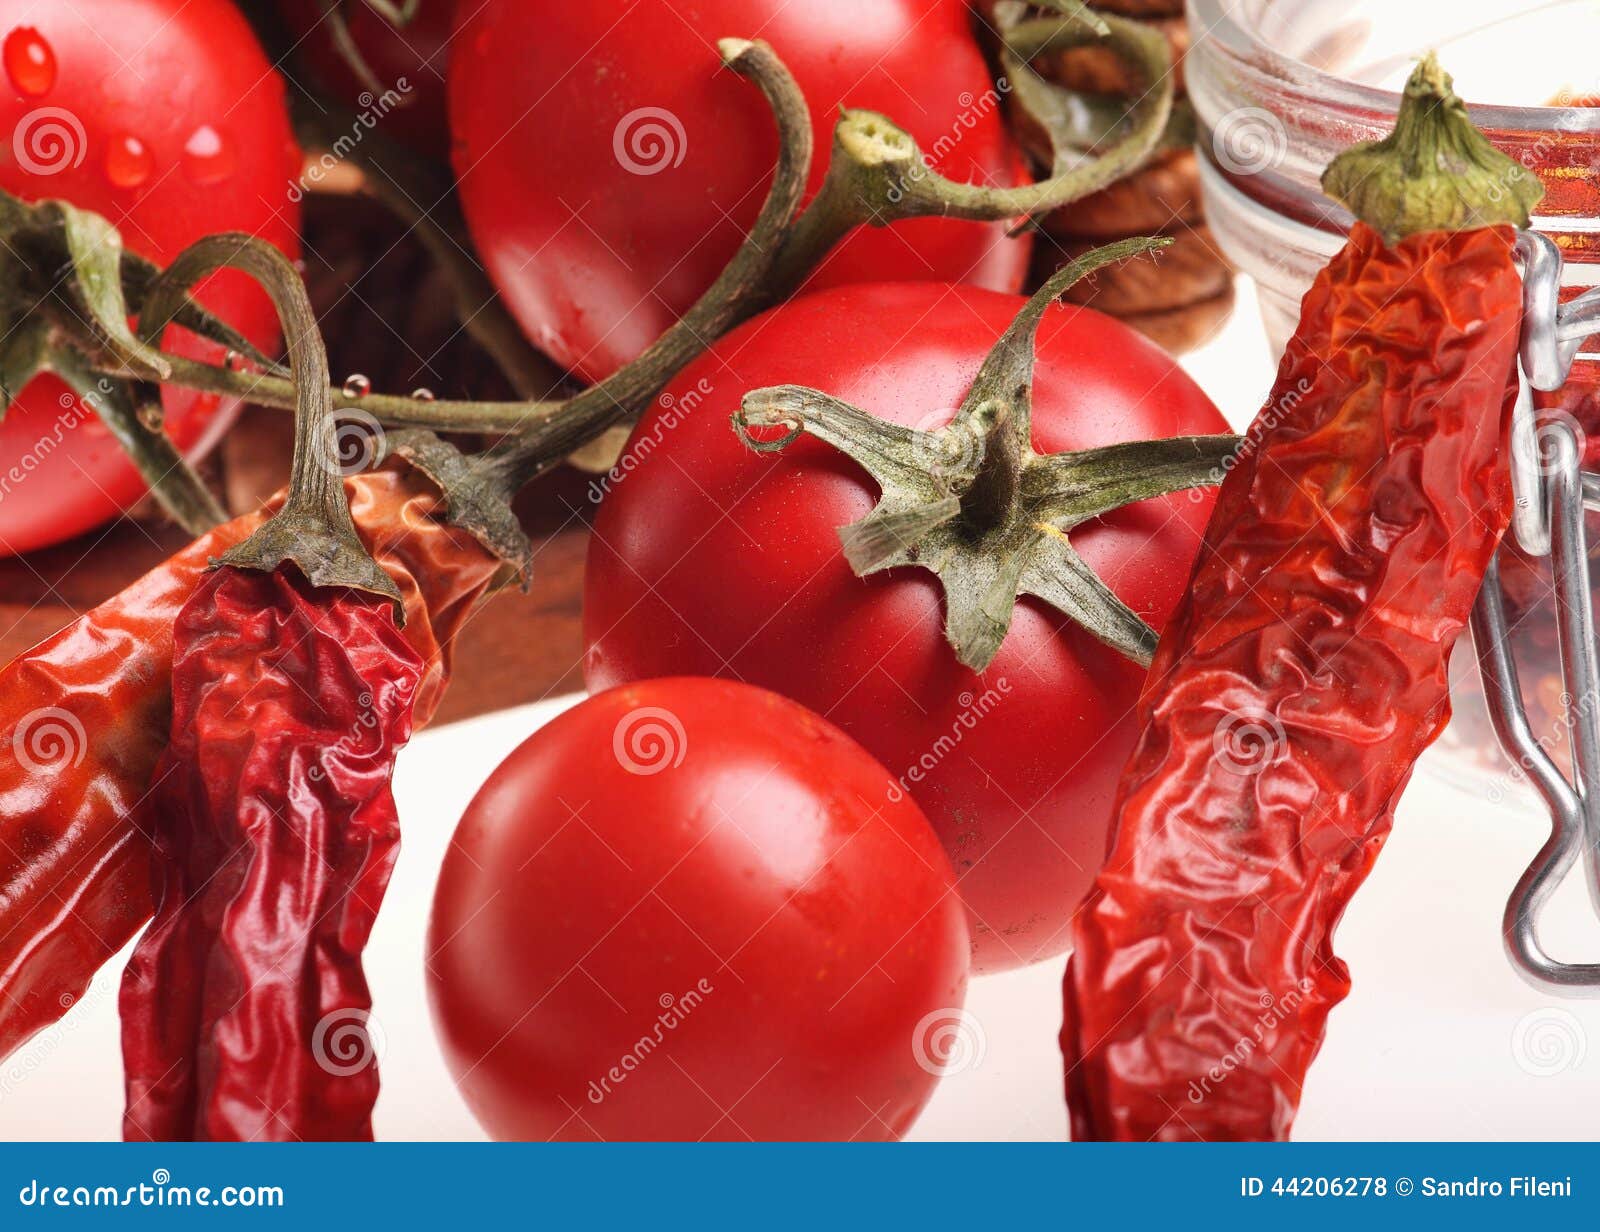 healthy italian raw food: cherry tomatoes,red chil